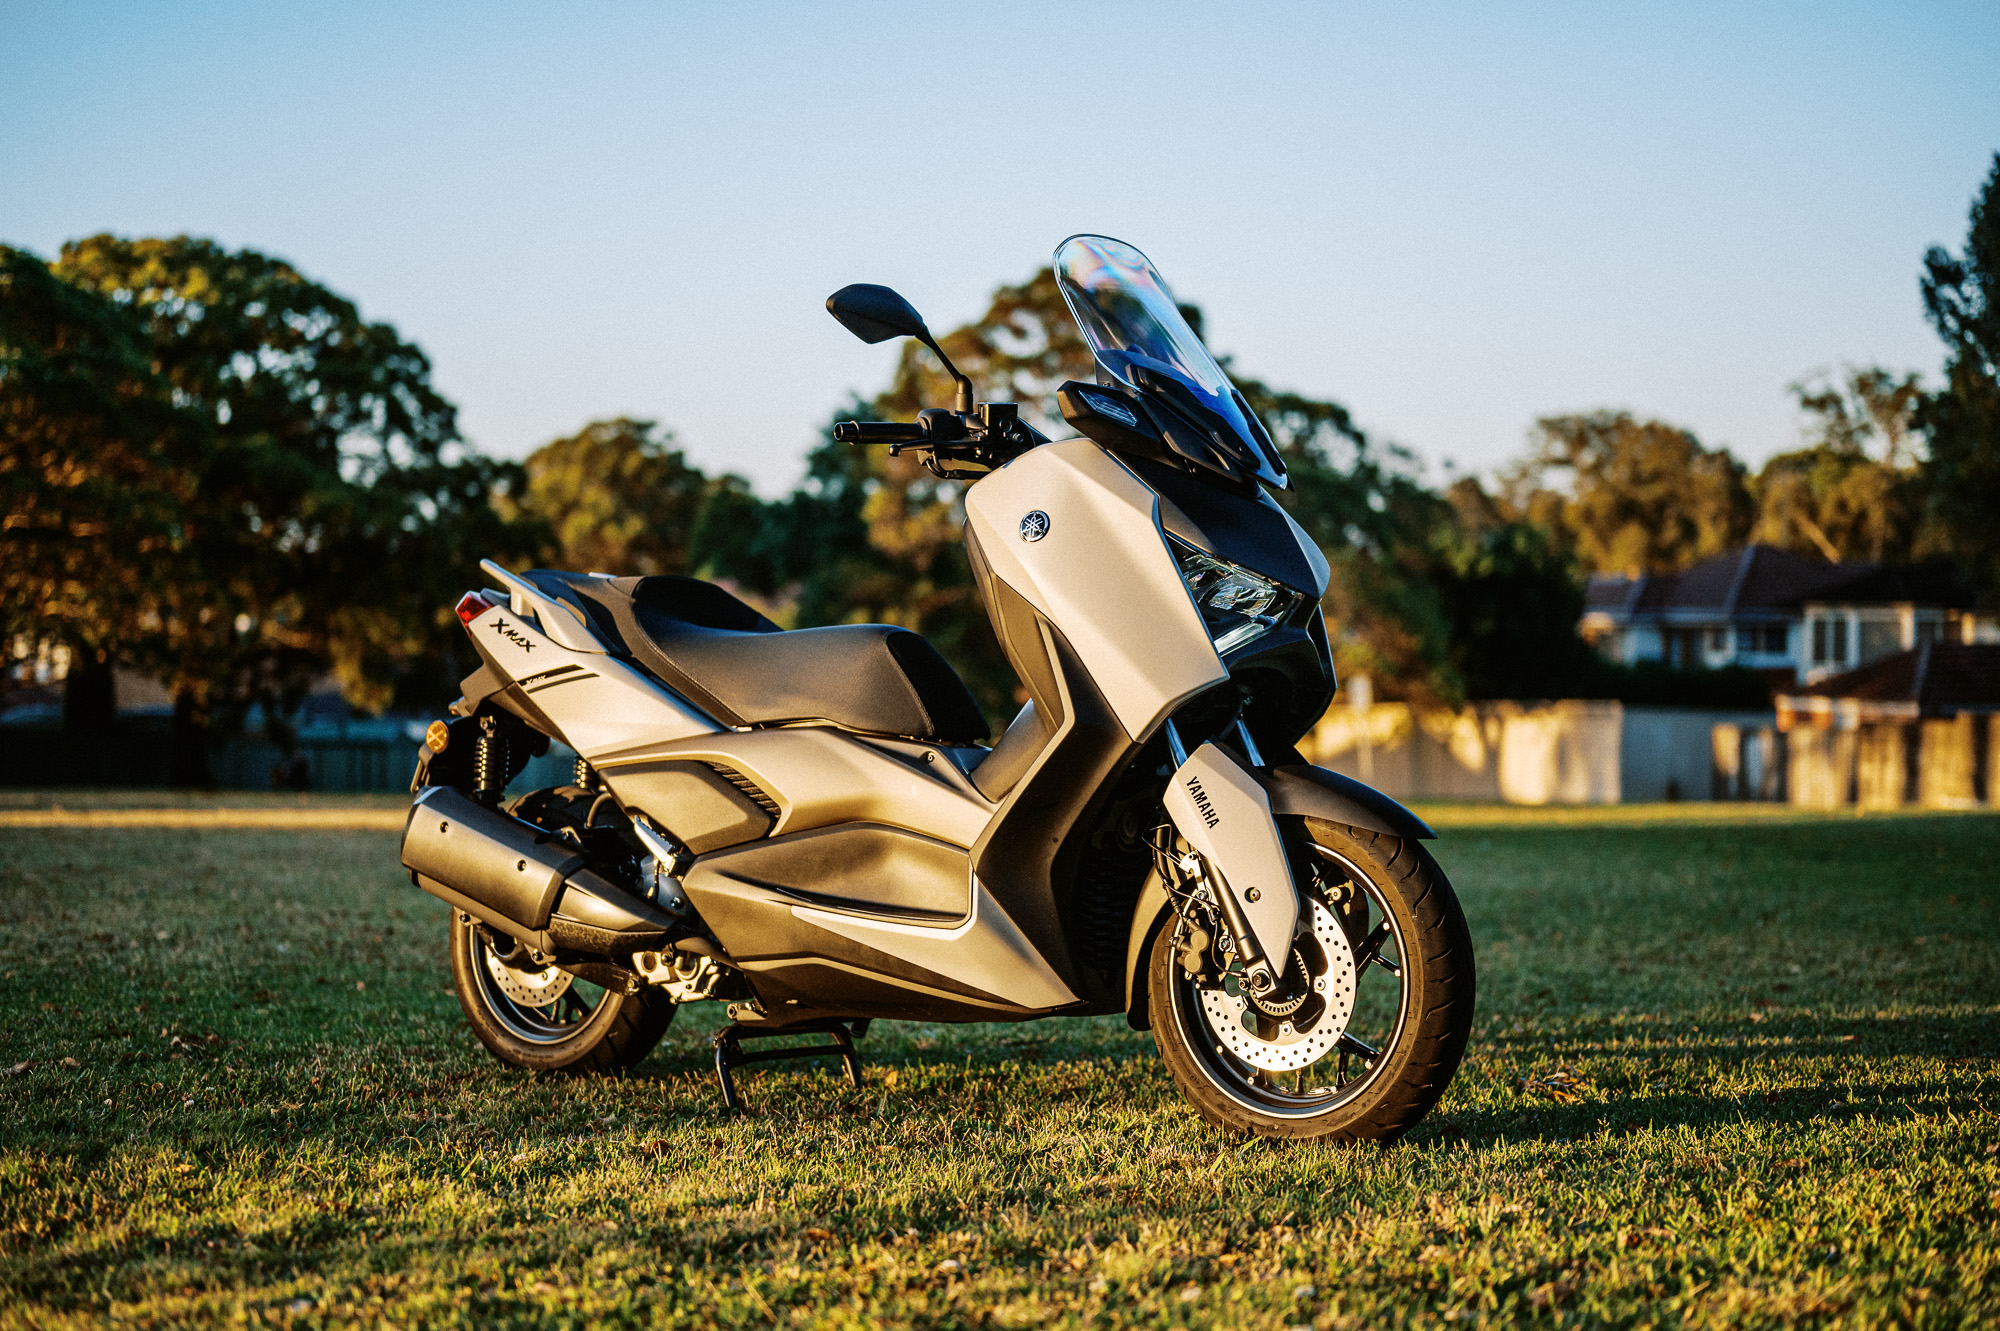 Great for The City ! 2023 Yamaha XMax 125 Tech Max 